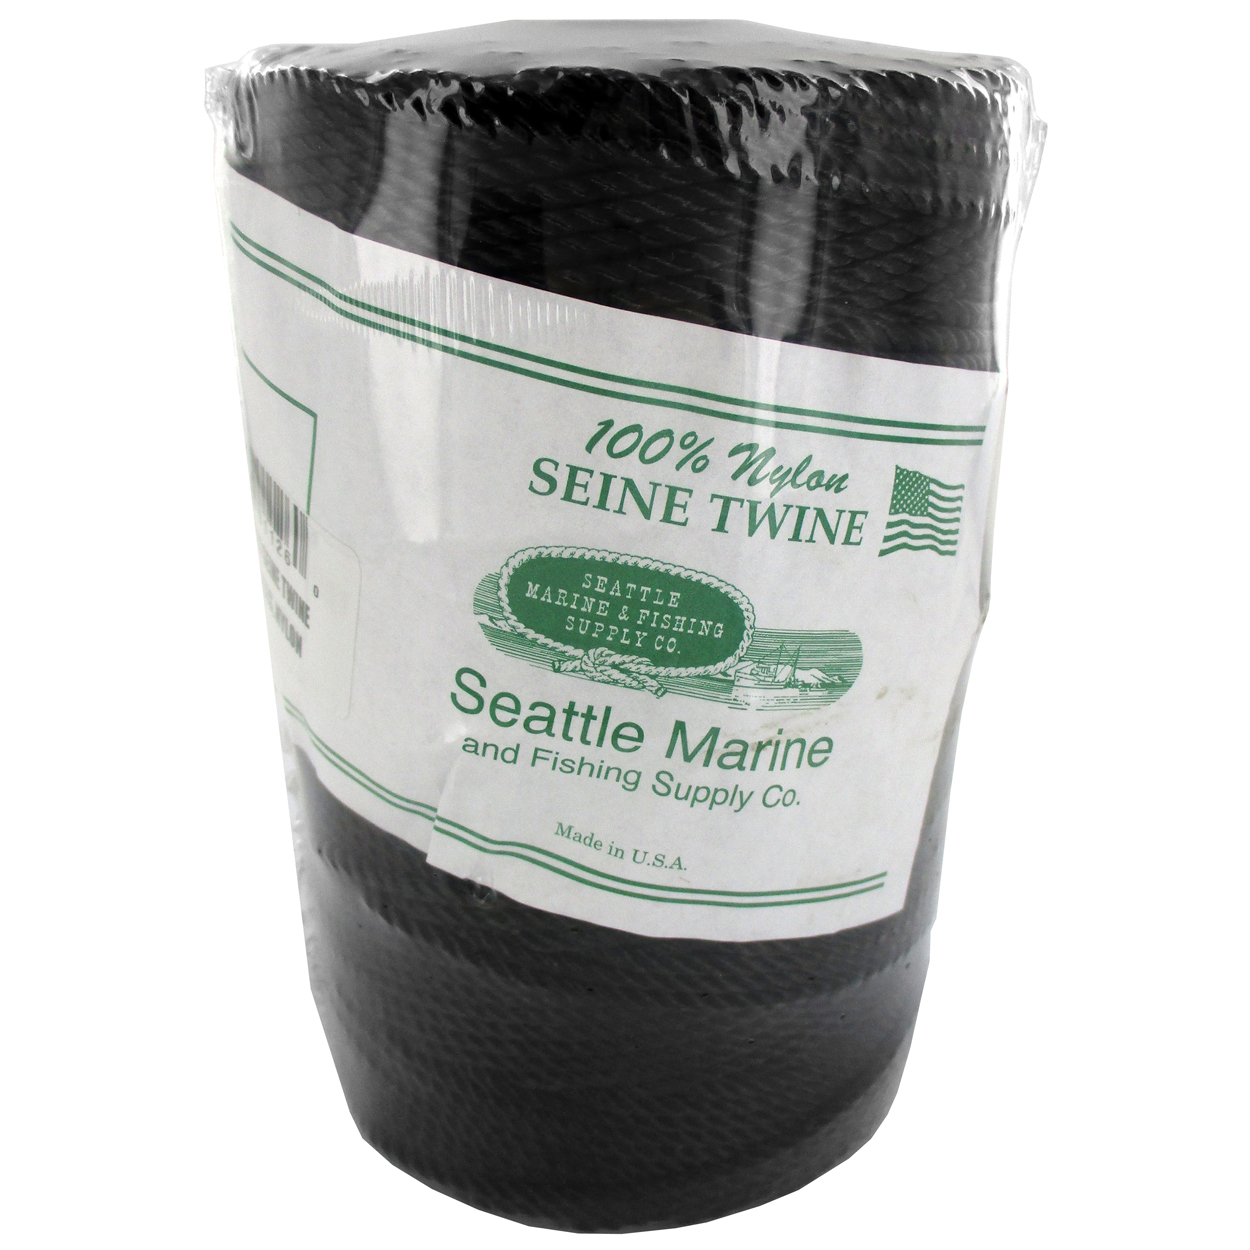 MLR Packaging Supplies and Equipment. 1/4 LB Tube Twisted Nylon Seine Twine